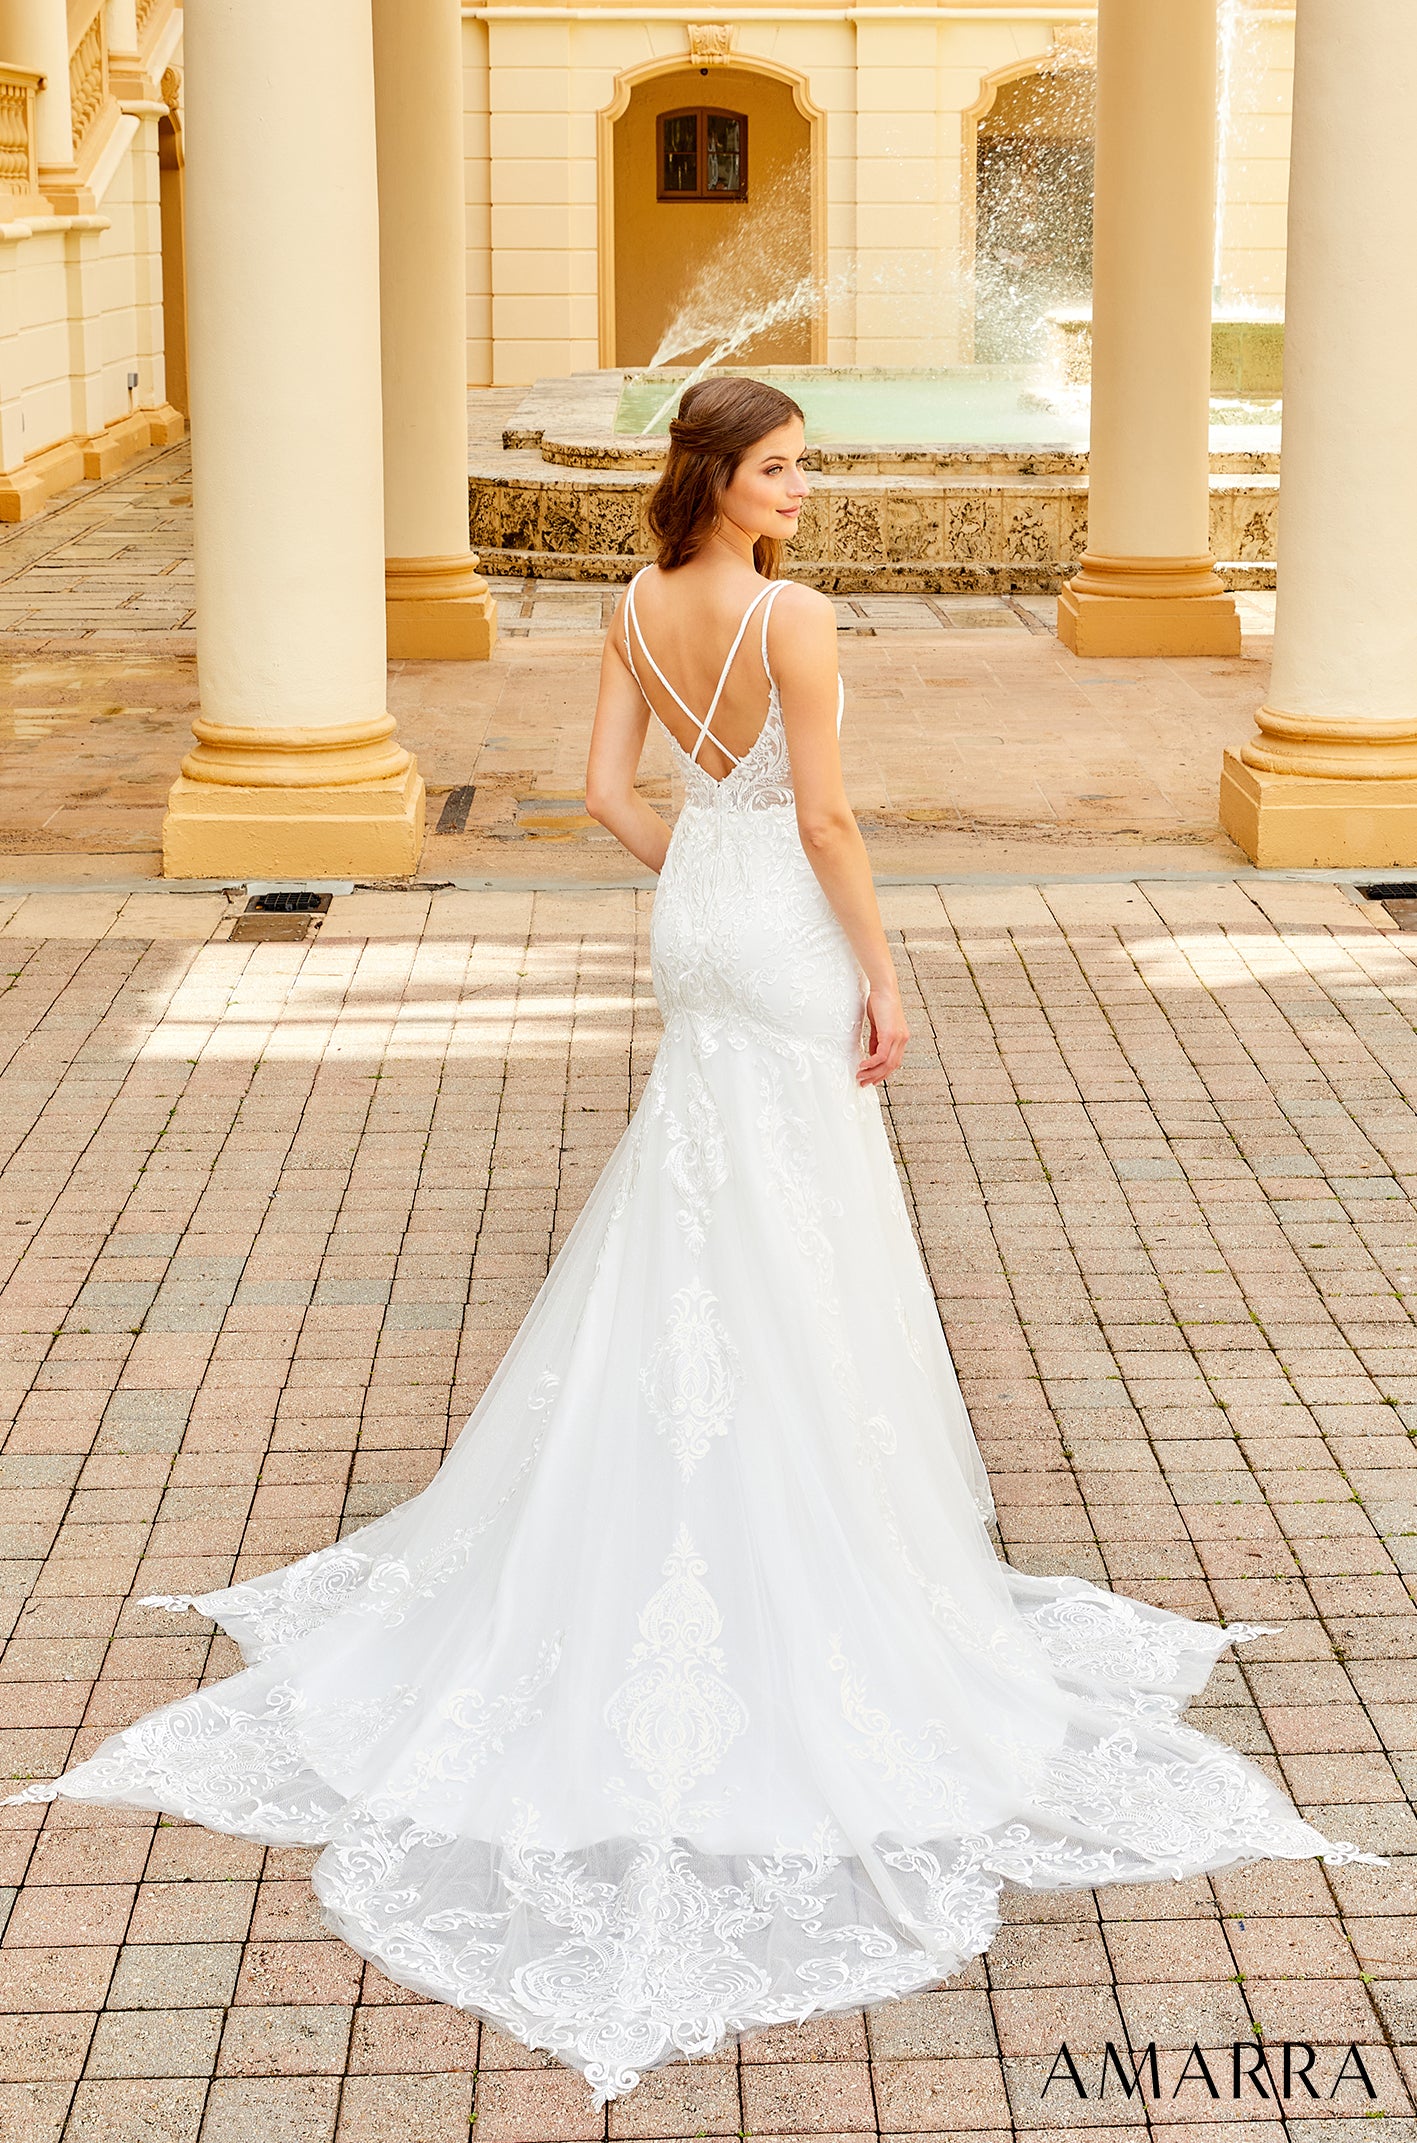 Amarra Bridal HART 84368 Backless Mermaid Wedding Dress Bridal Gown Train Sheer Lace Simple and classic makes for a beautiful romance. That’s what you’ll get when you wear this stunning dress on your wedding day. The demure lace bodice features plunging v-neckline and a fitted design, while the dramatic flare at the knees allows for a bit of fun and creates the look of a mermaid. 